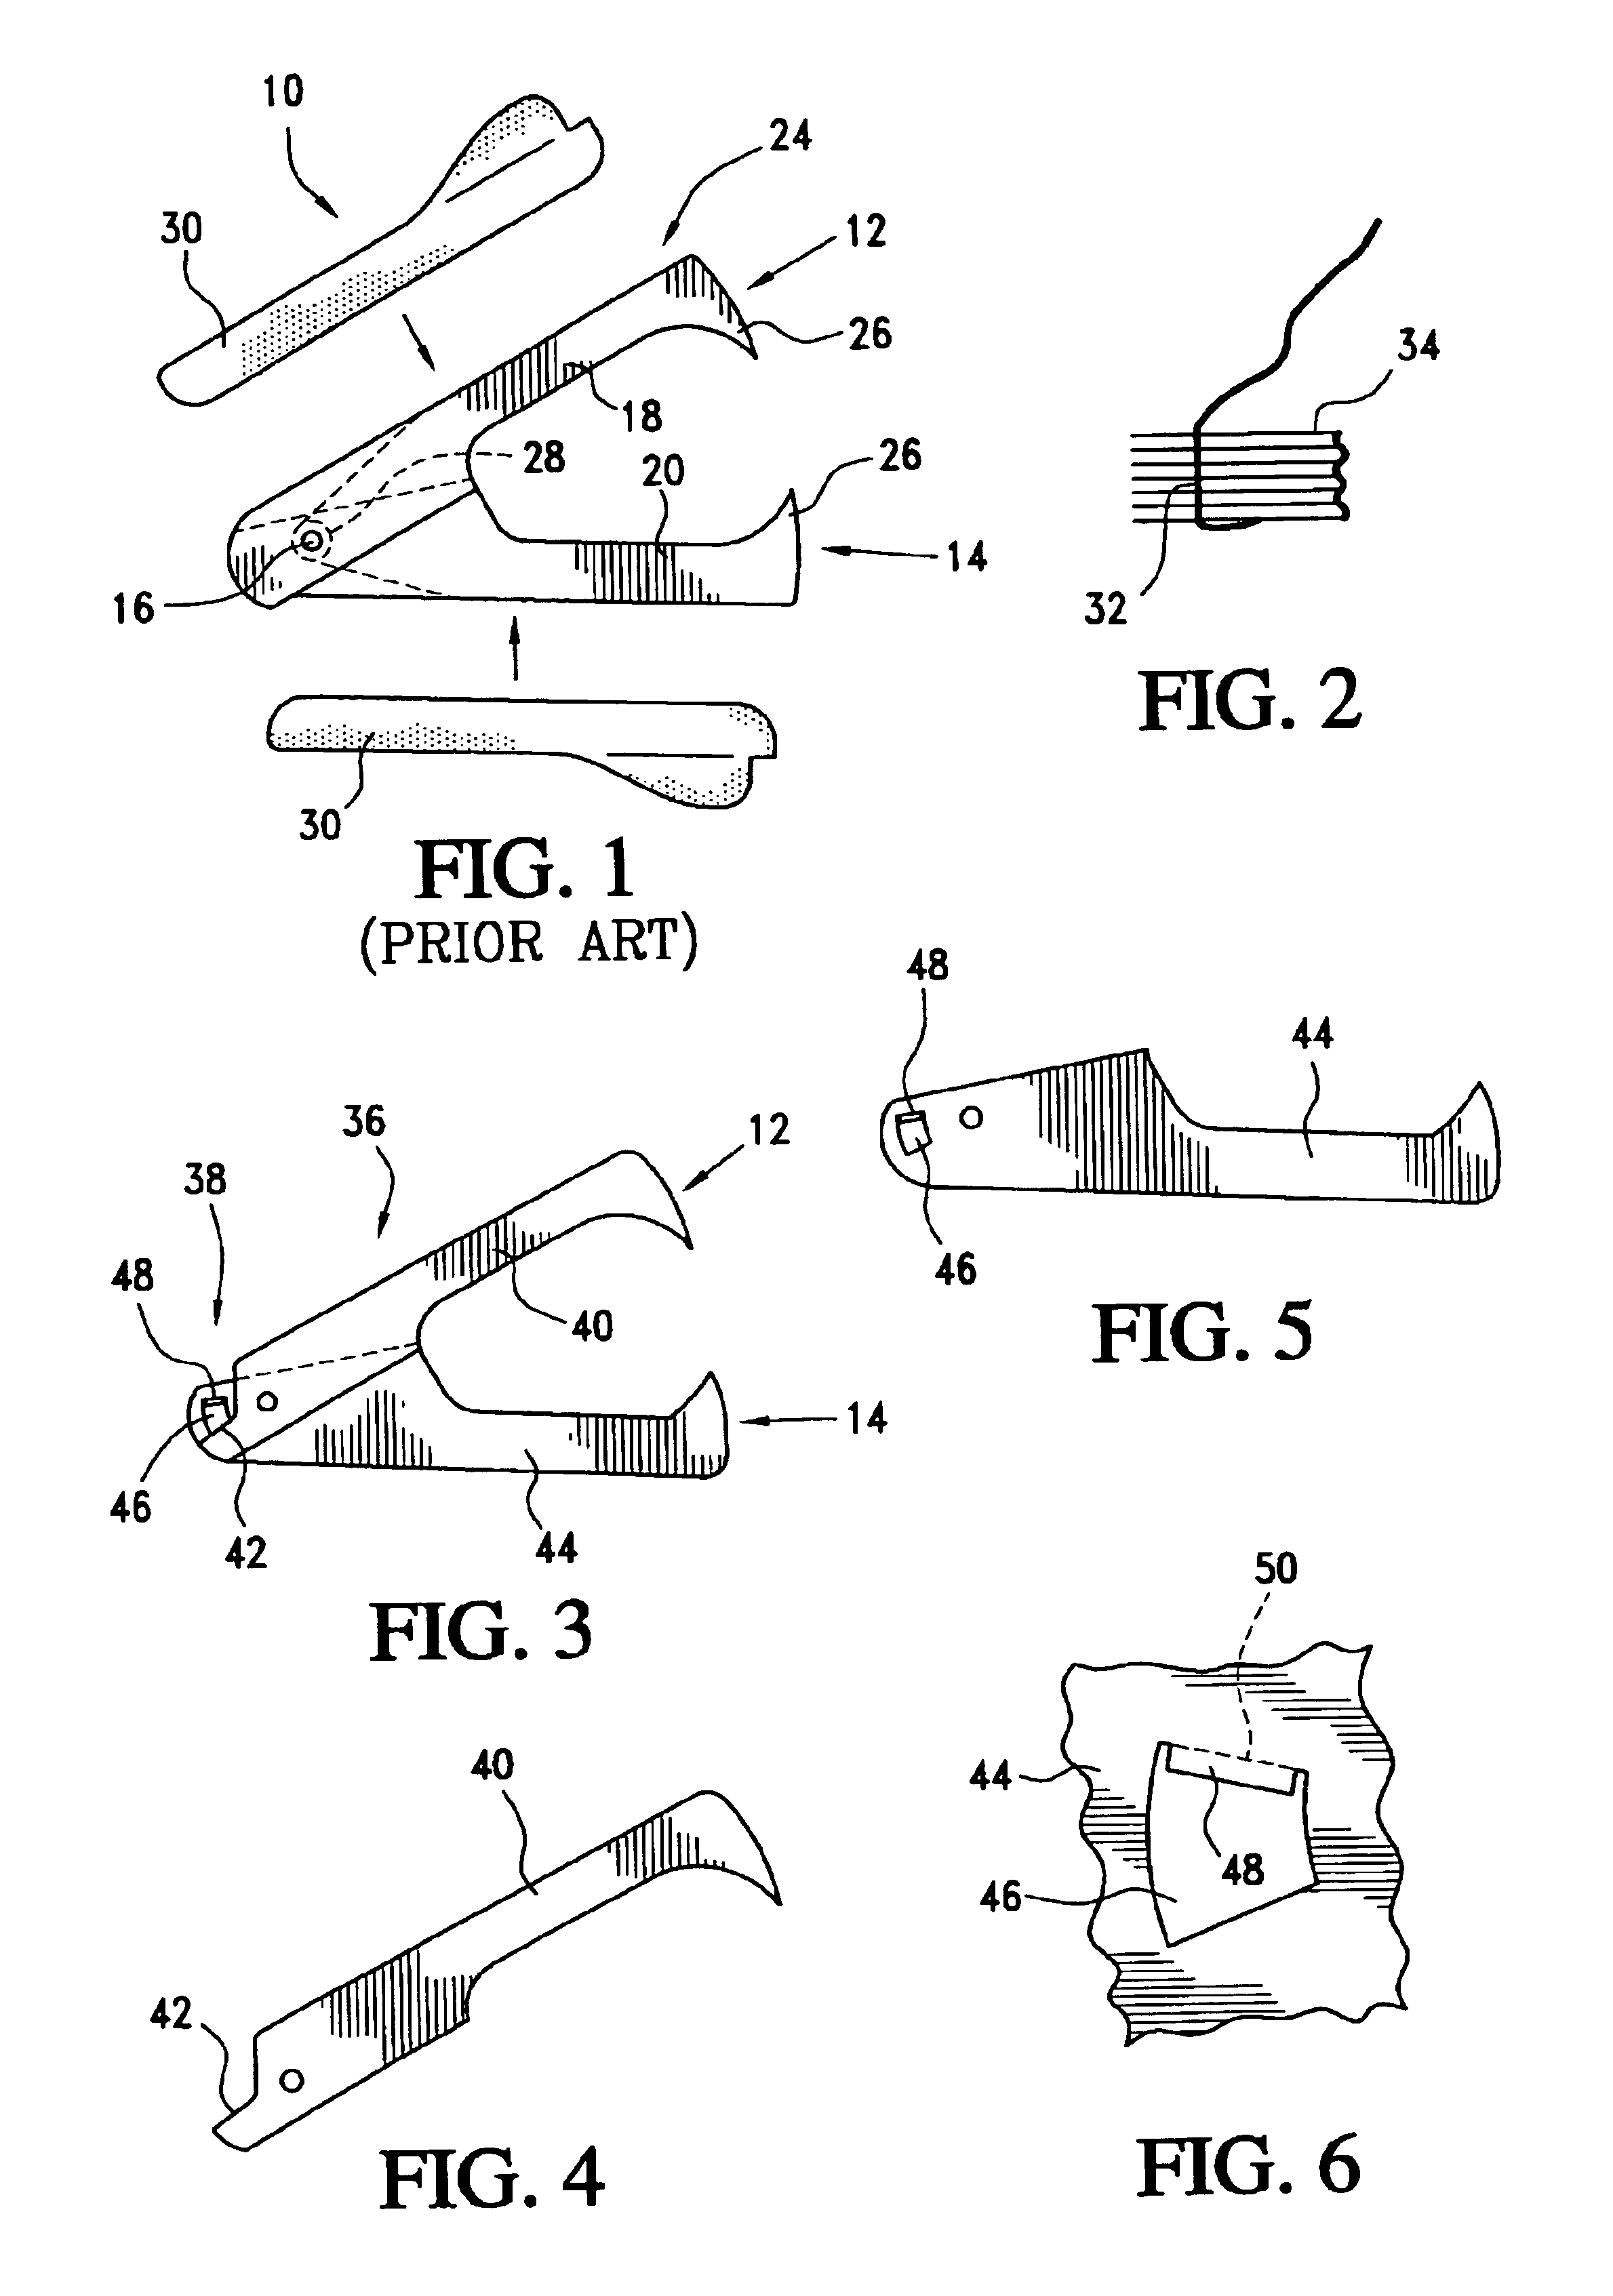 Staple puller with pliers for removing stragglers